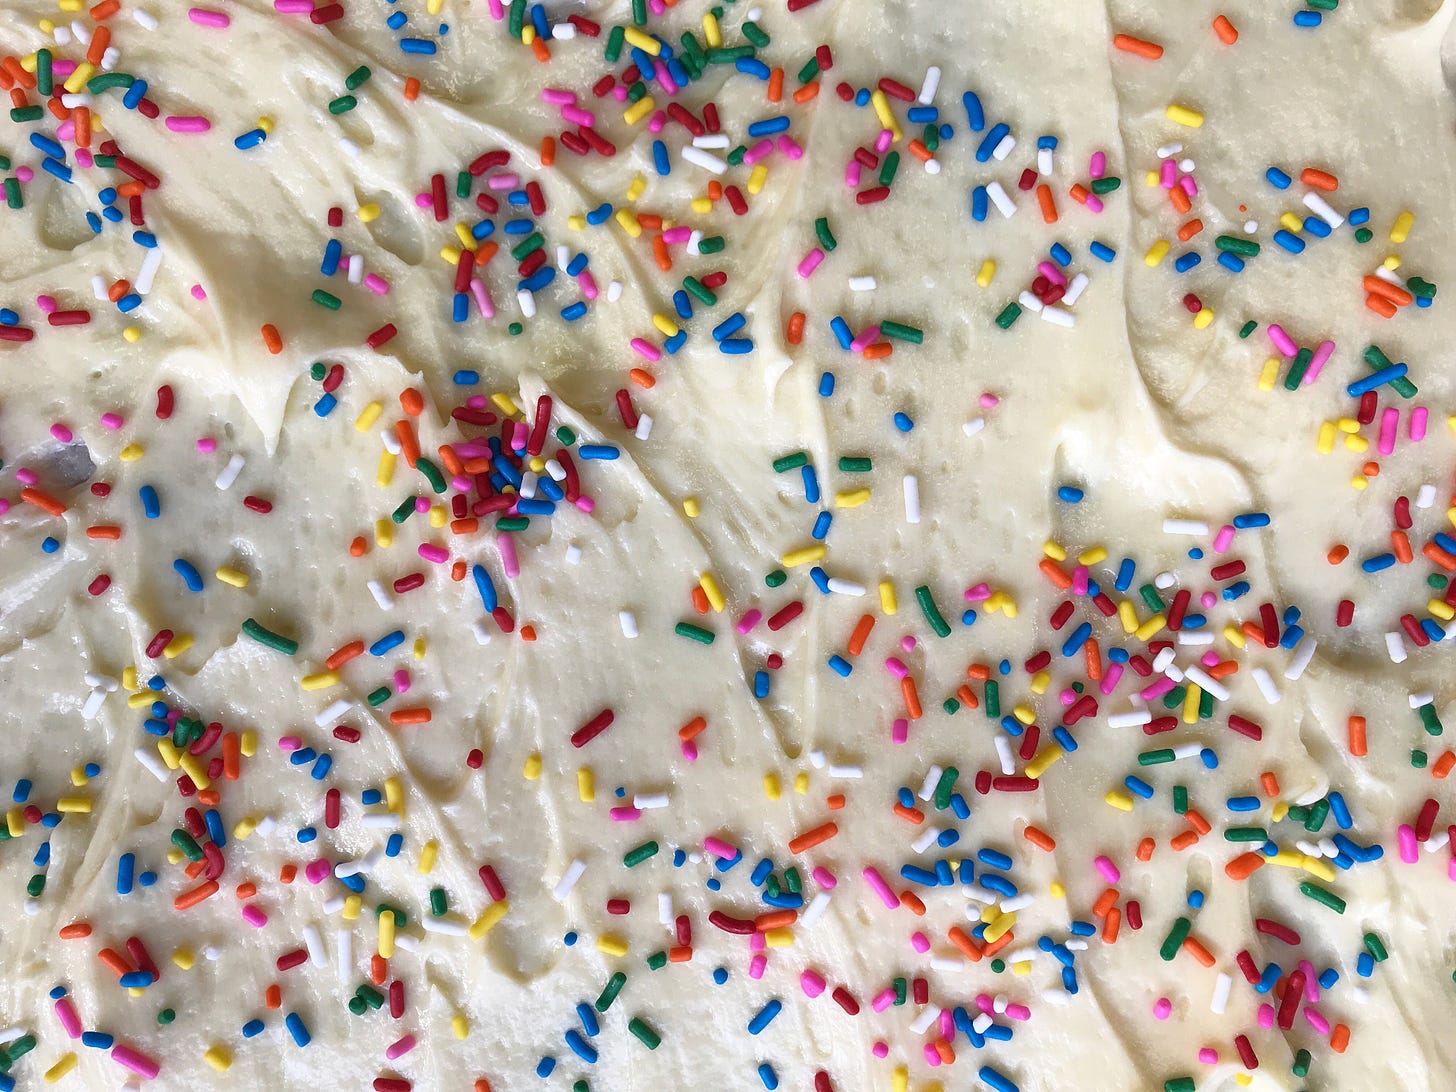 Sheet cake with rainbow colored sprinkles